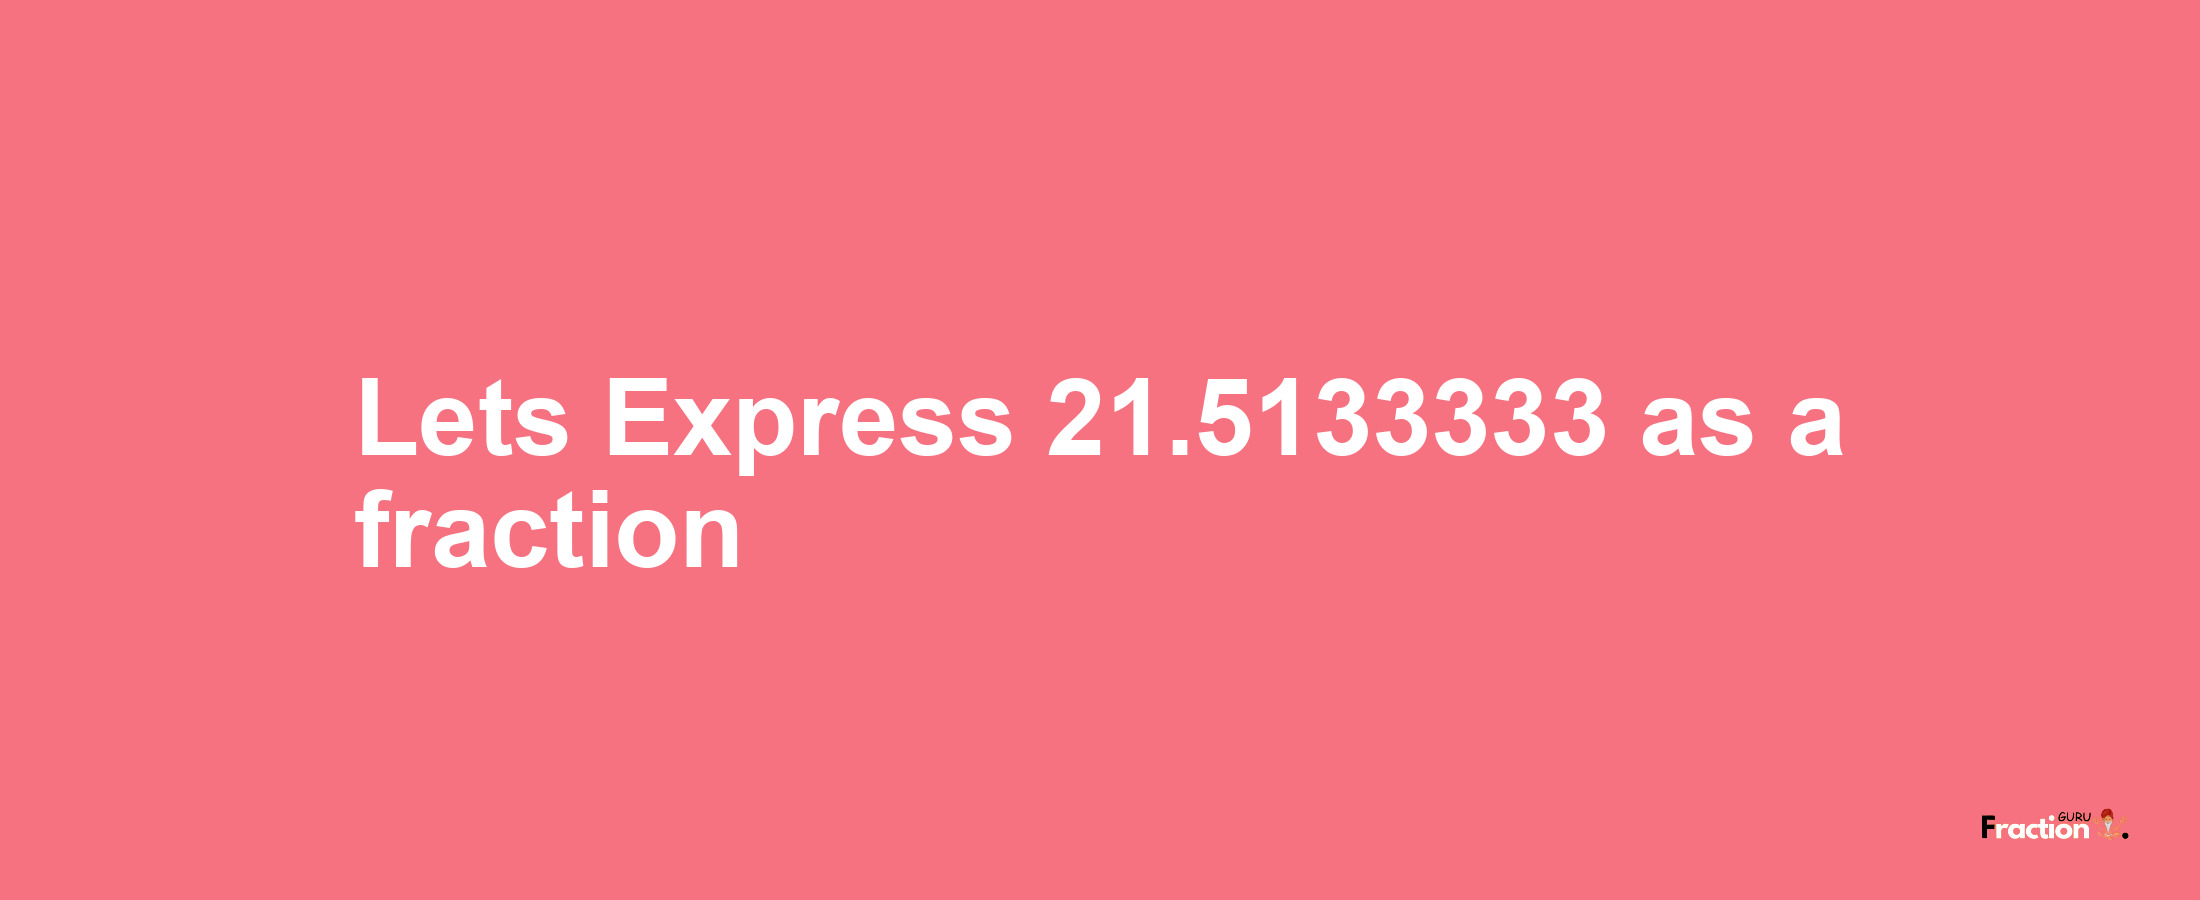 Lets Express 21.5133333 as afraction